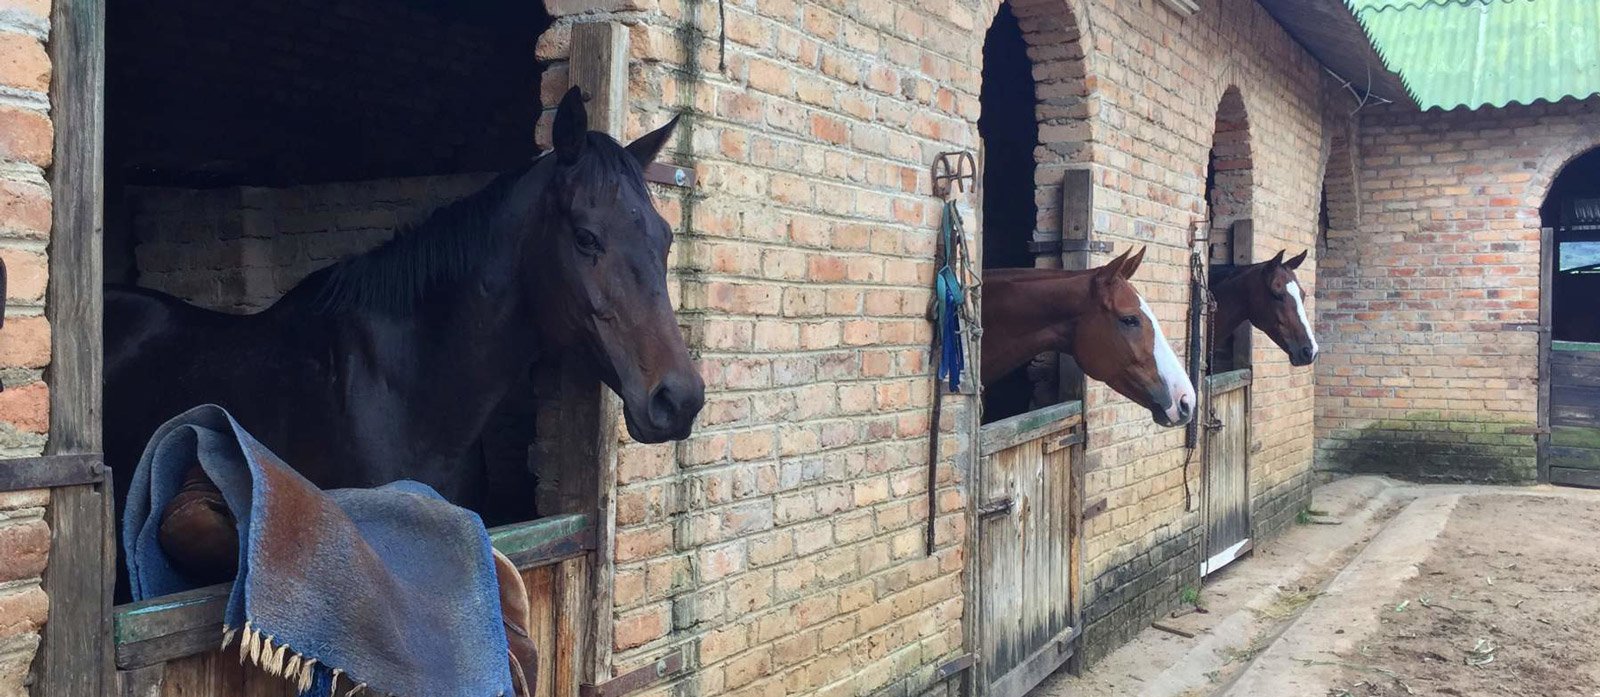 Working Abroad With Horses Will Help When Buying Your First Horse